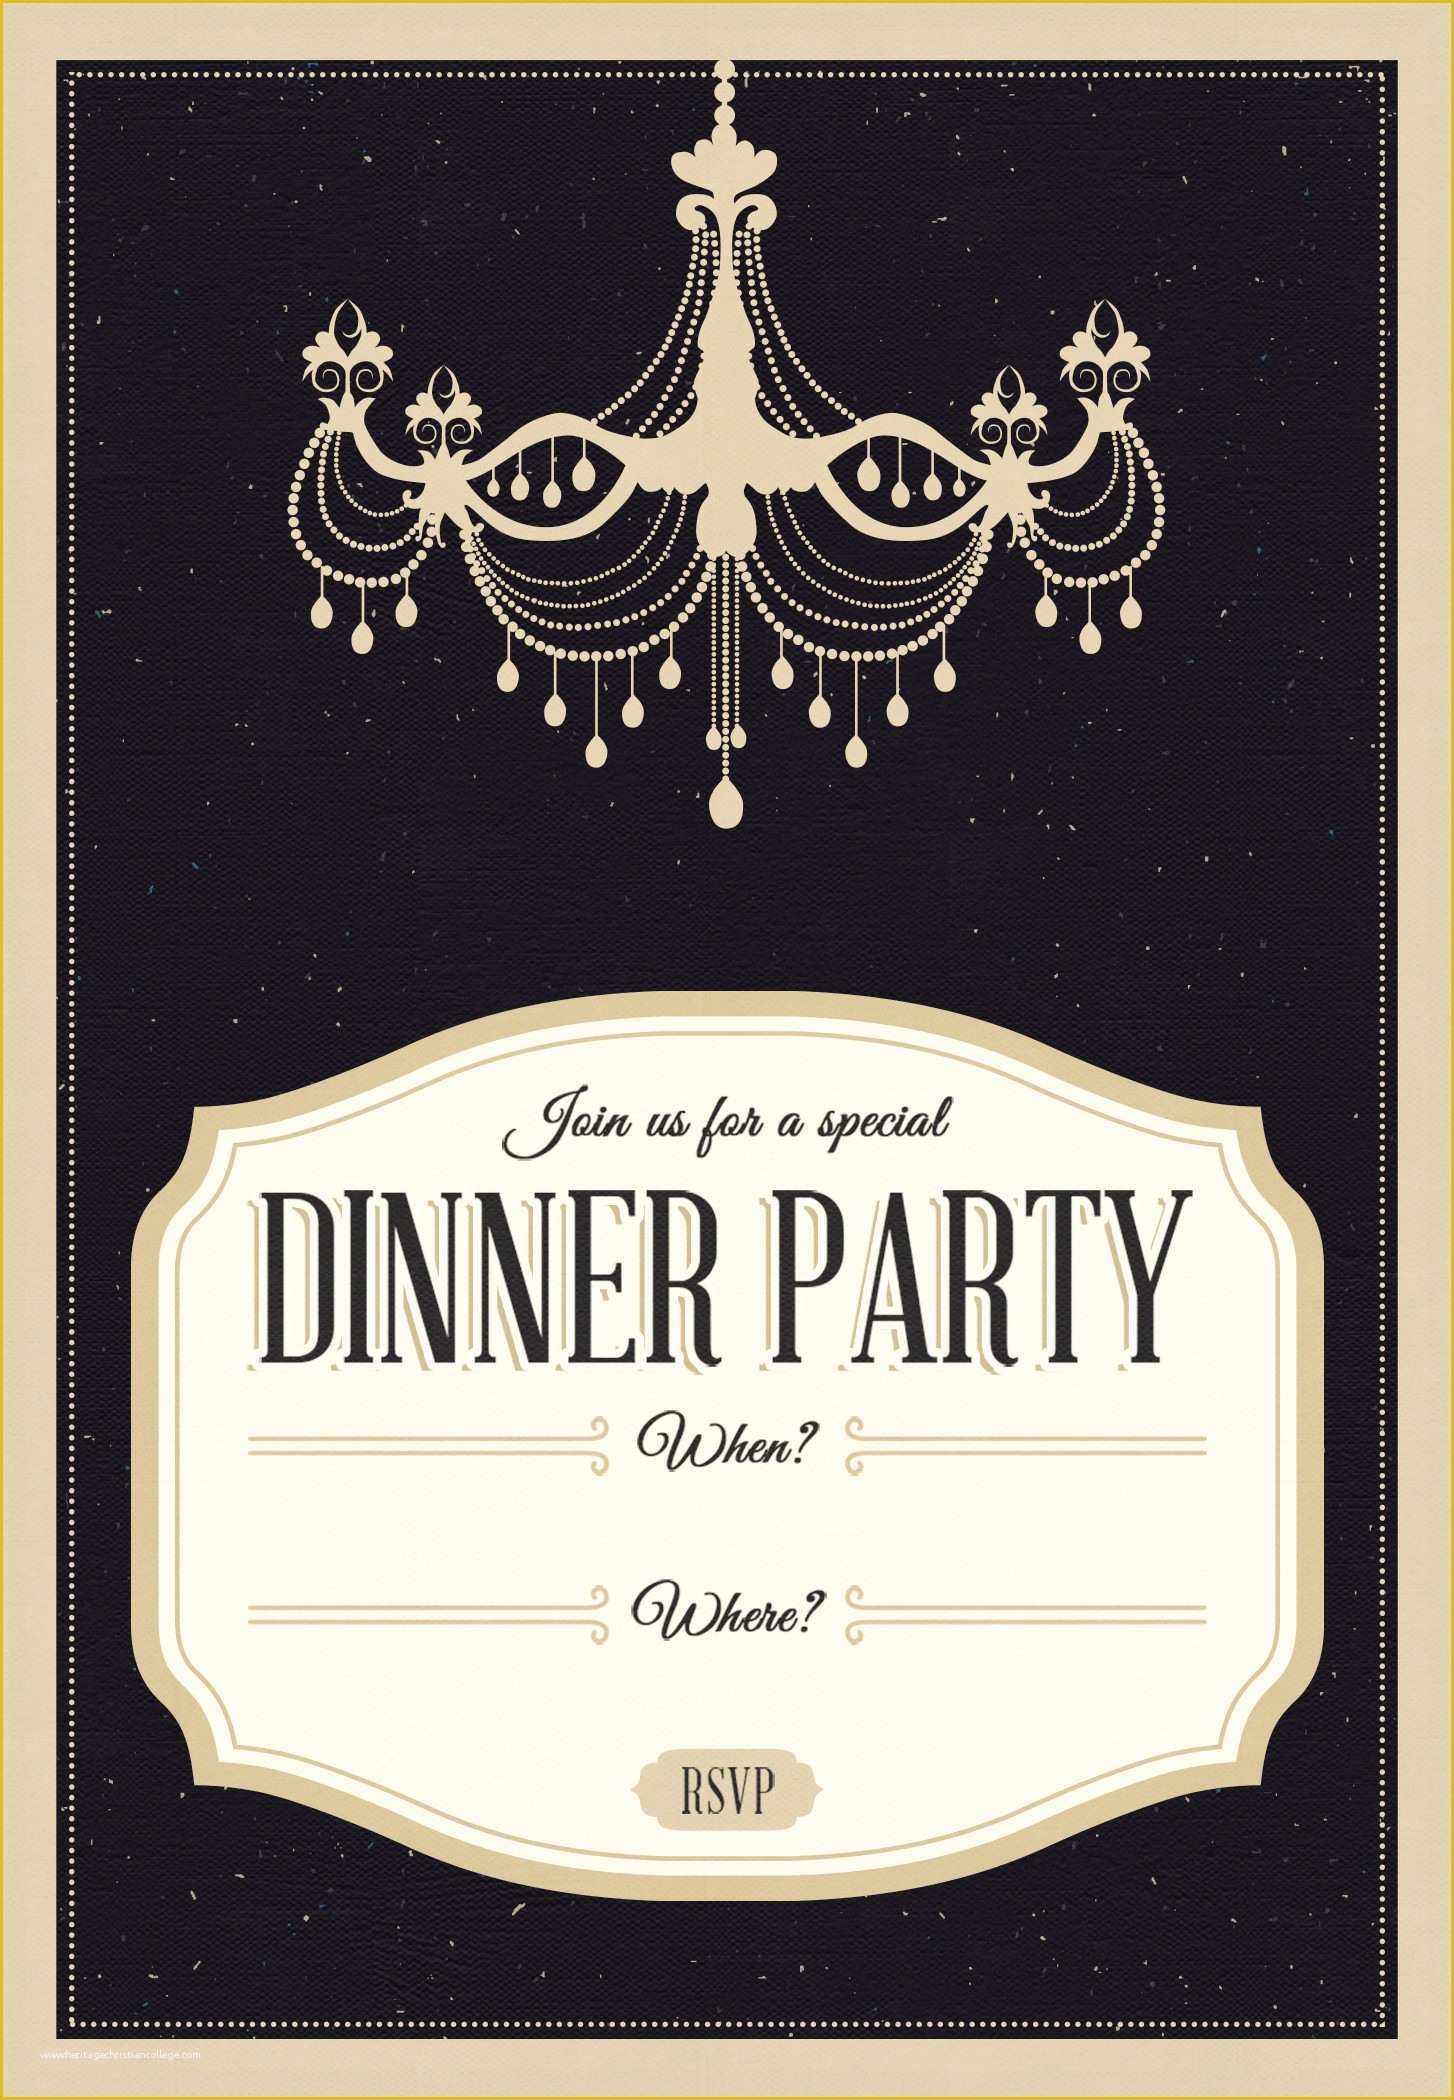 Dinner Invitation Templates Free Download Of Dinner Party Invitation Templates Free Download Fwauk